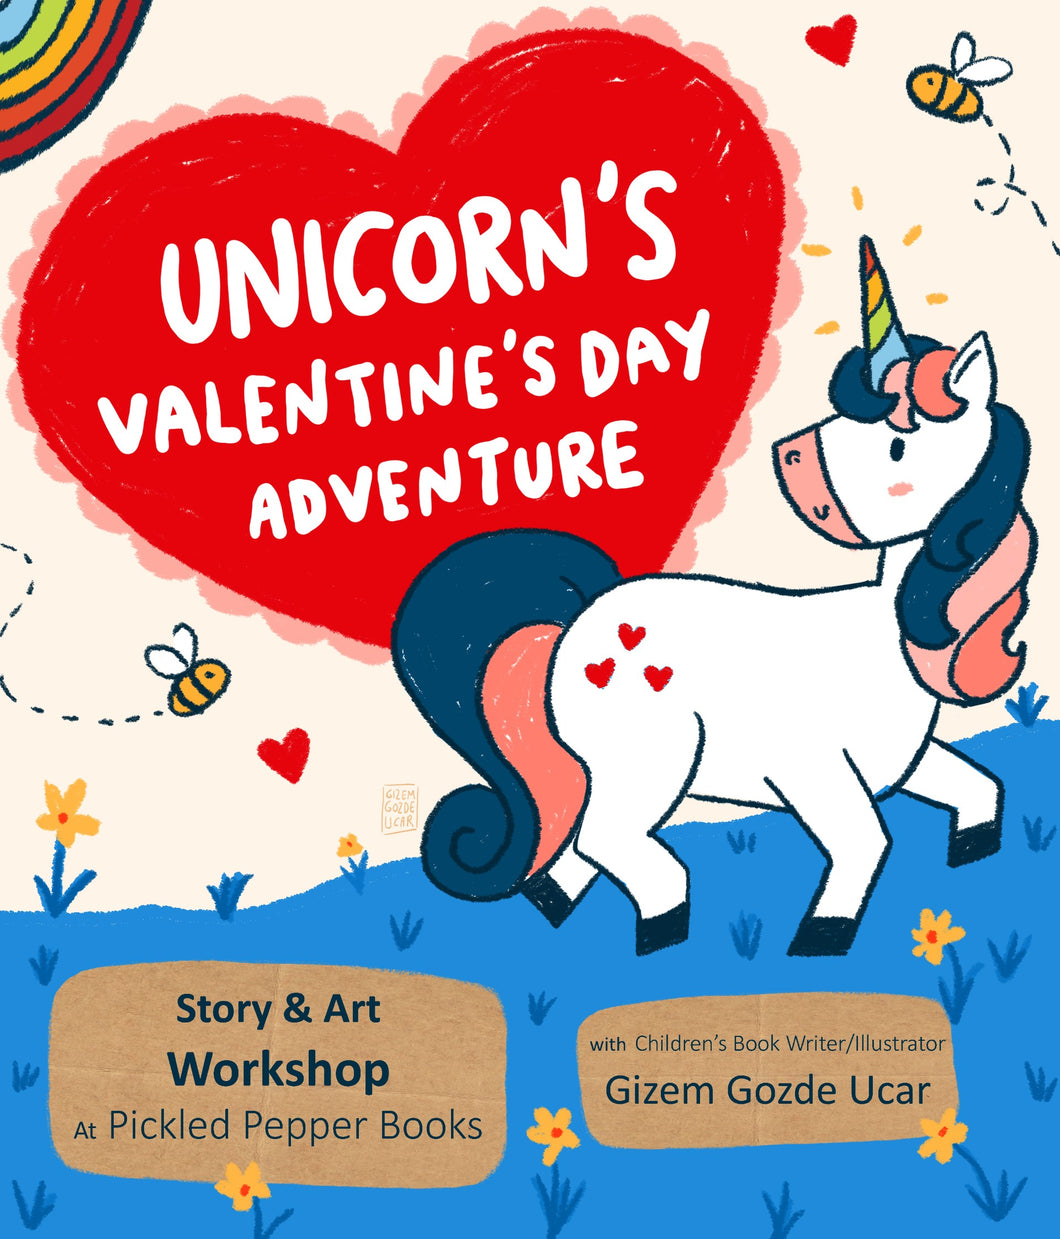 Unicorn's Valentine's Day Adventure! Story and Art Workshop Monday 12th February 11:30am - 12:30pm